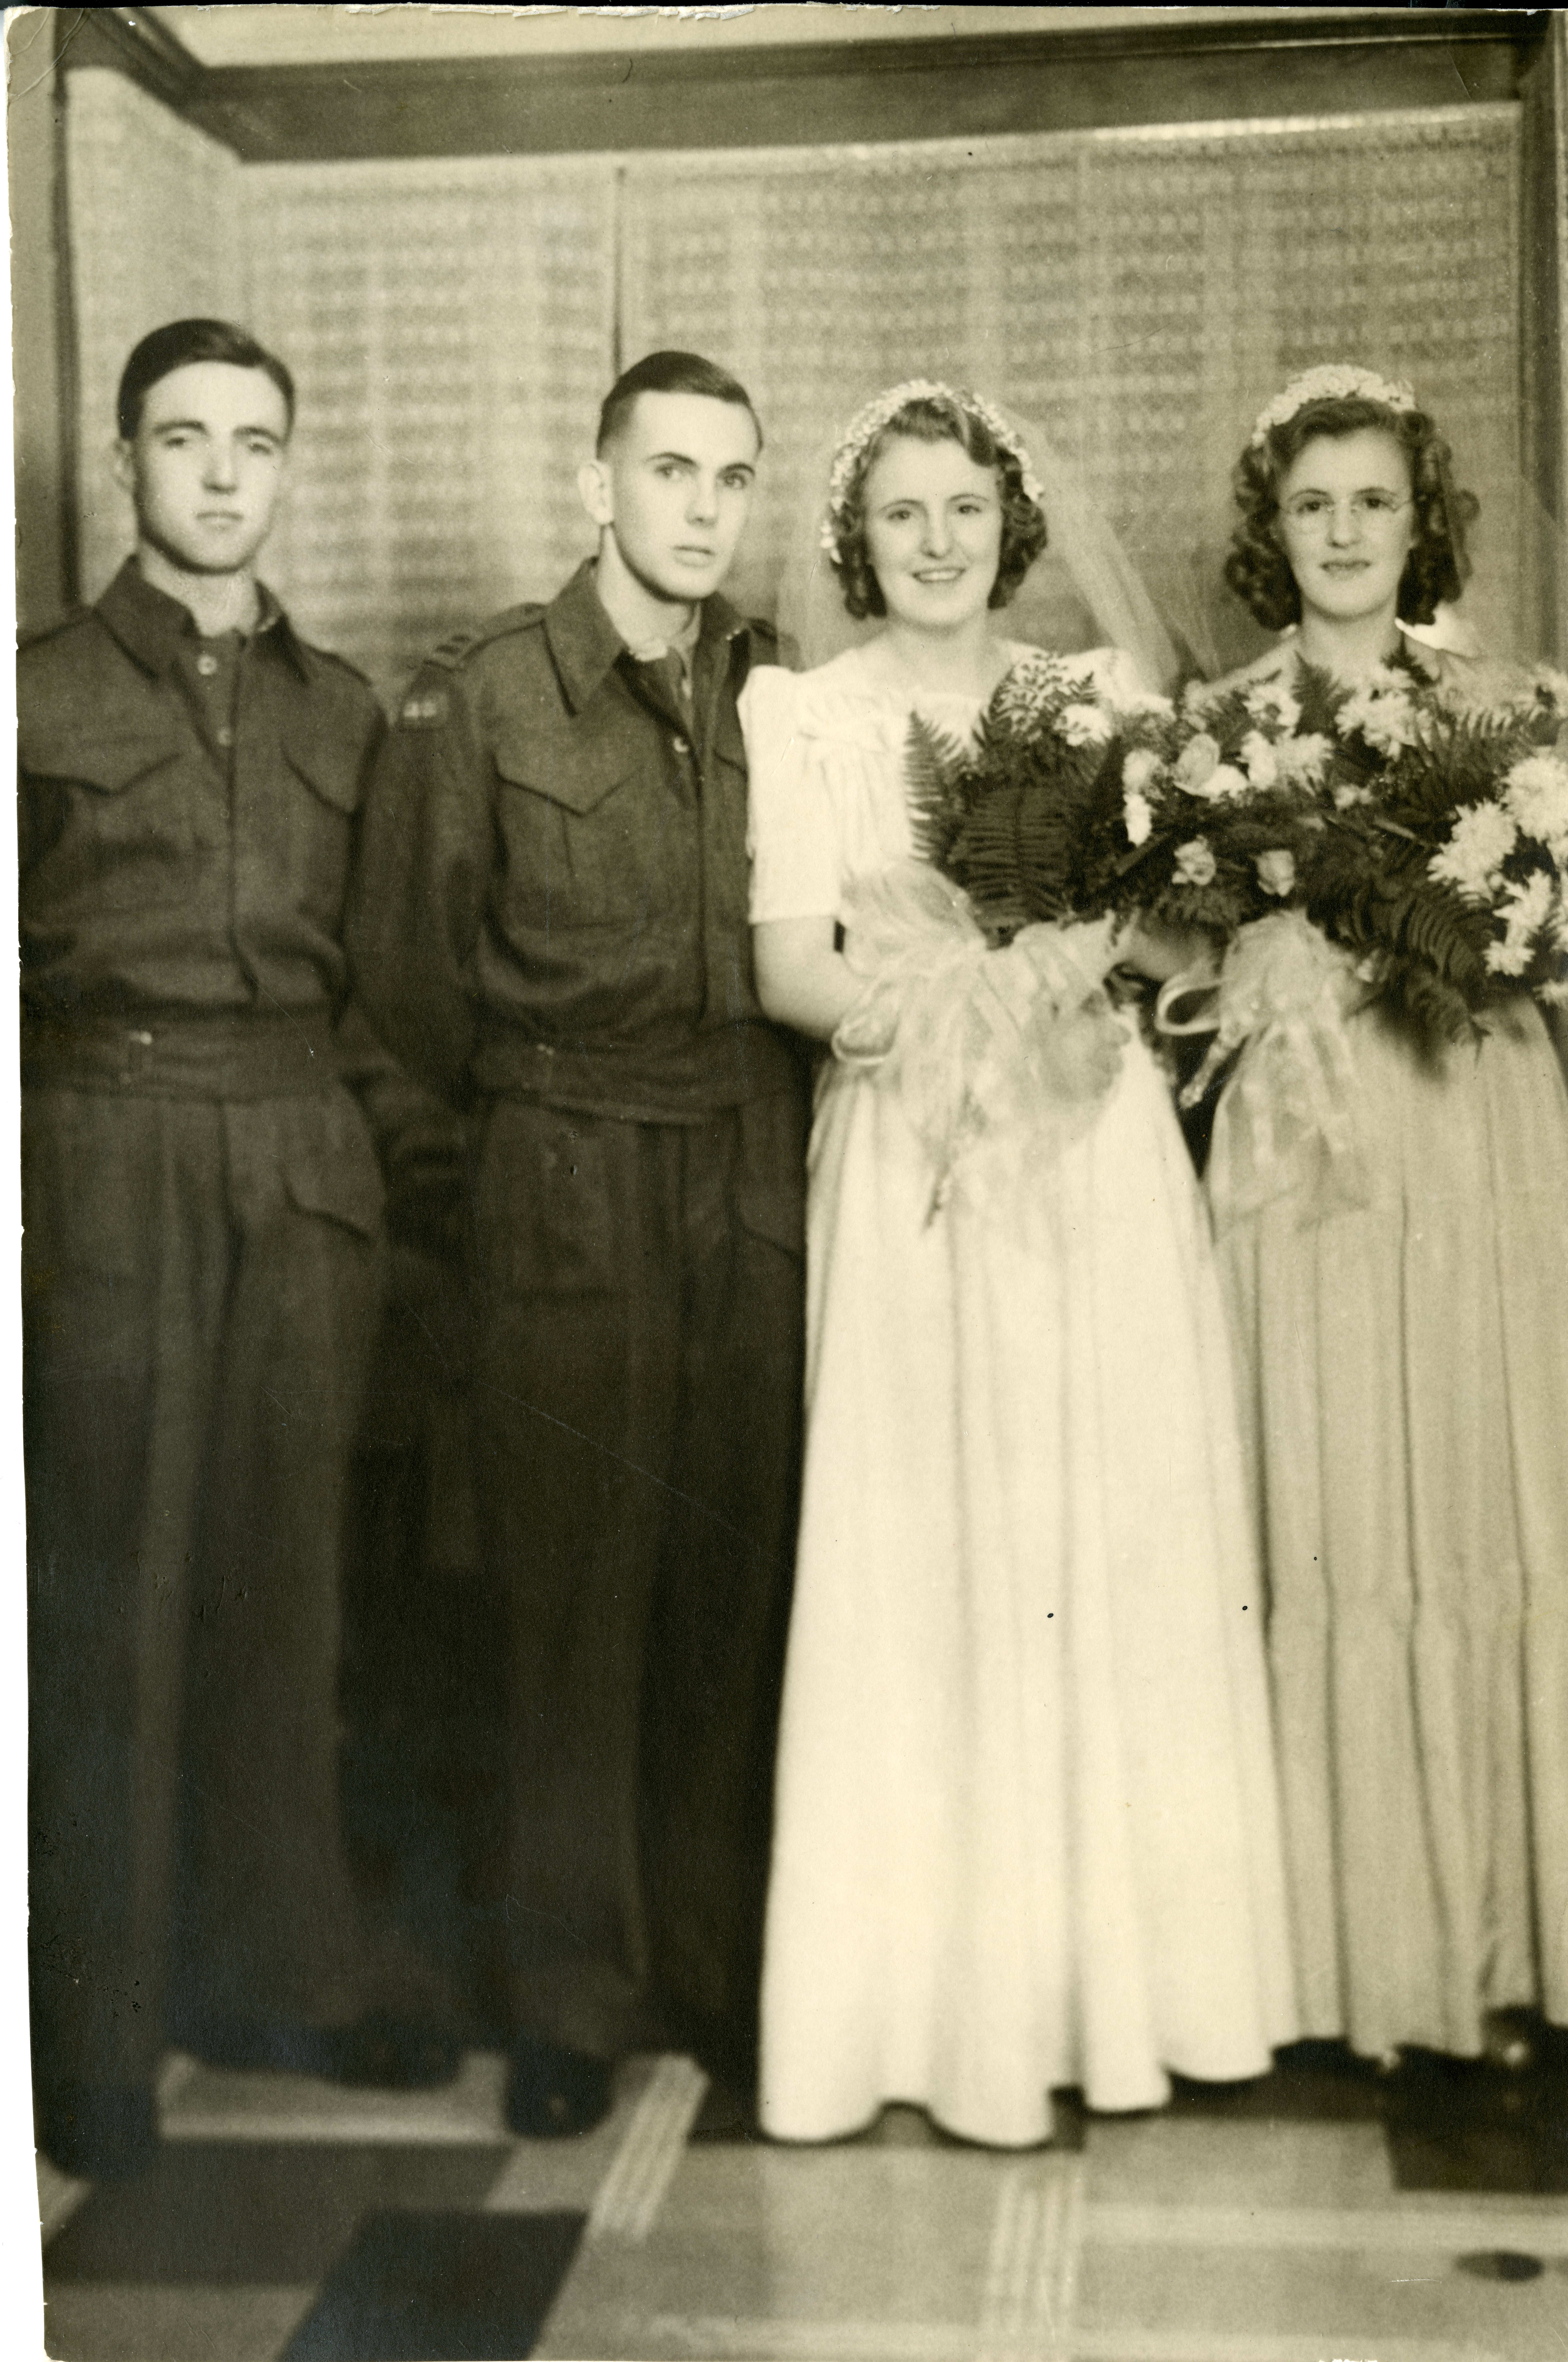 Vintage posed wedding photograph with bride and groom in the centre and bridesmaid and best man either side of them. The groom and best man are both in uniform, while the bride and bridesmaid both hold bouquets.